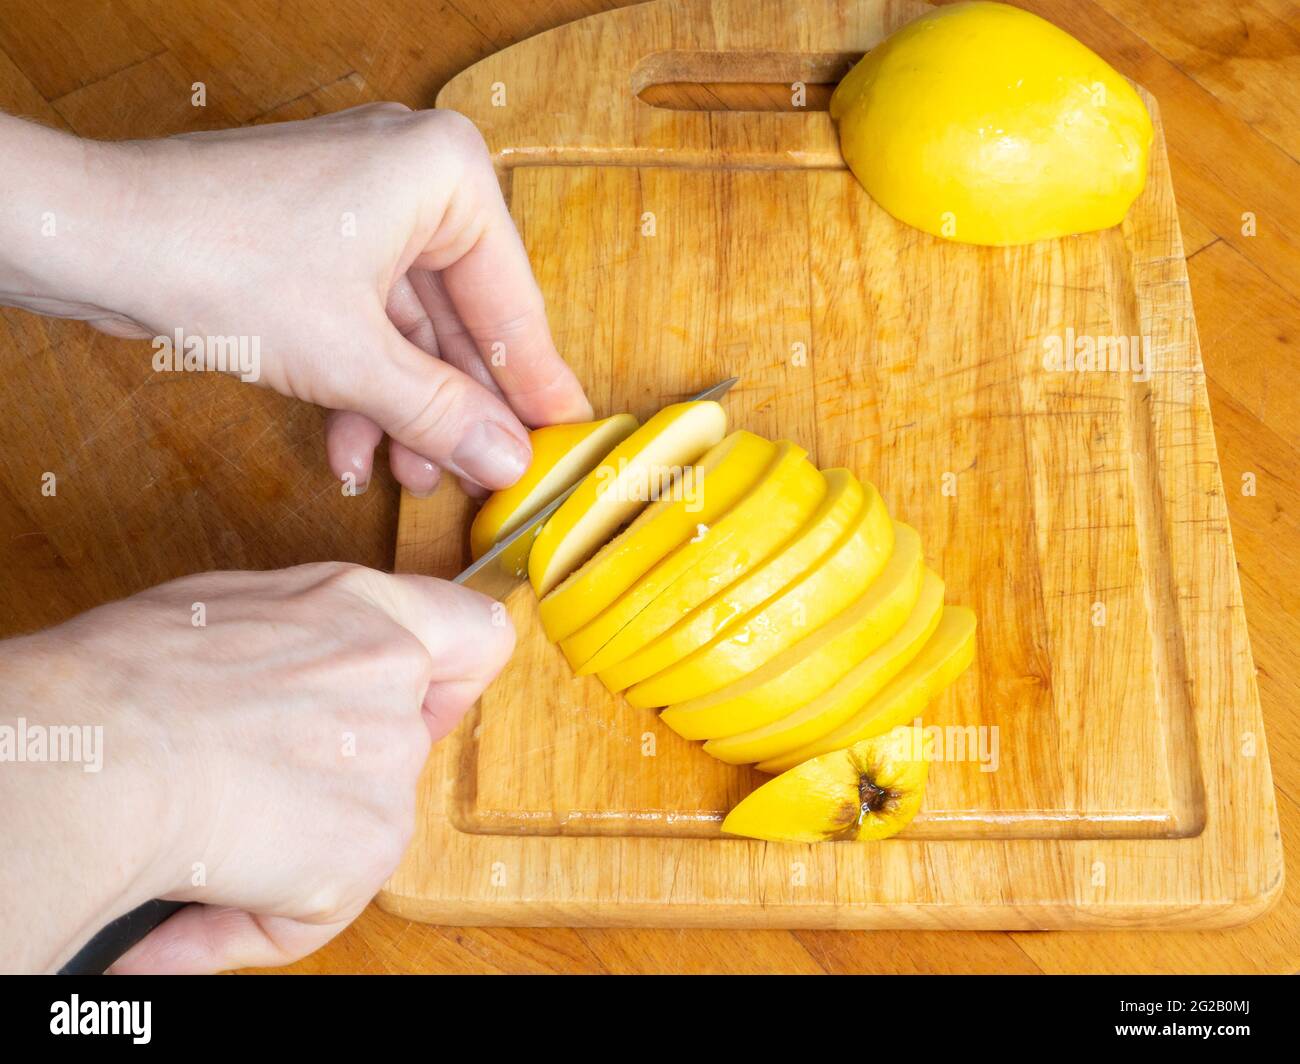 Hands cut with a sharp knife yellow iva into thin pieces on a wooden kitchen board. Stock Photo